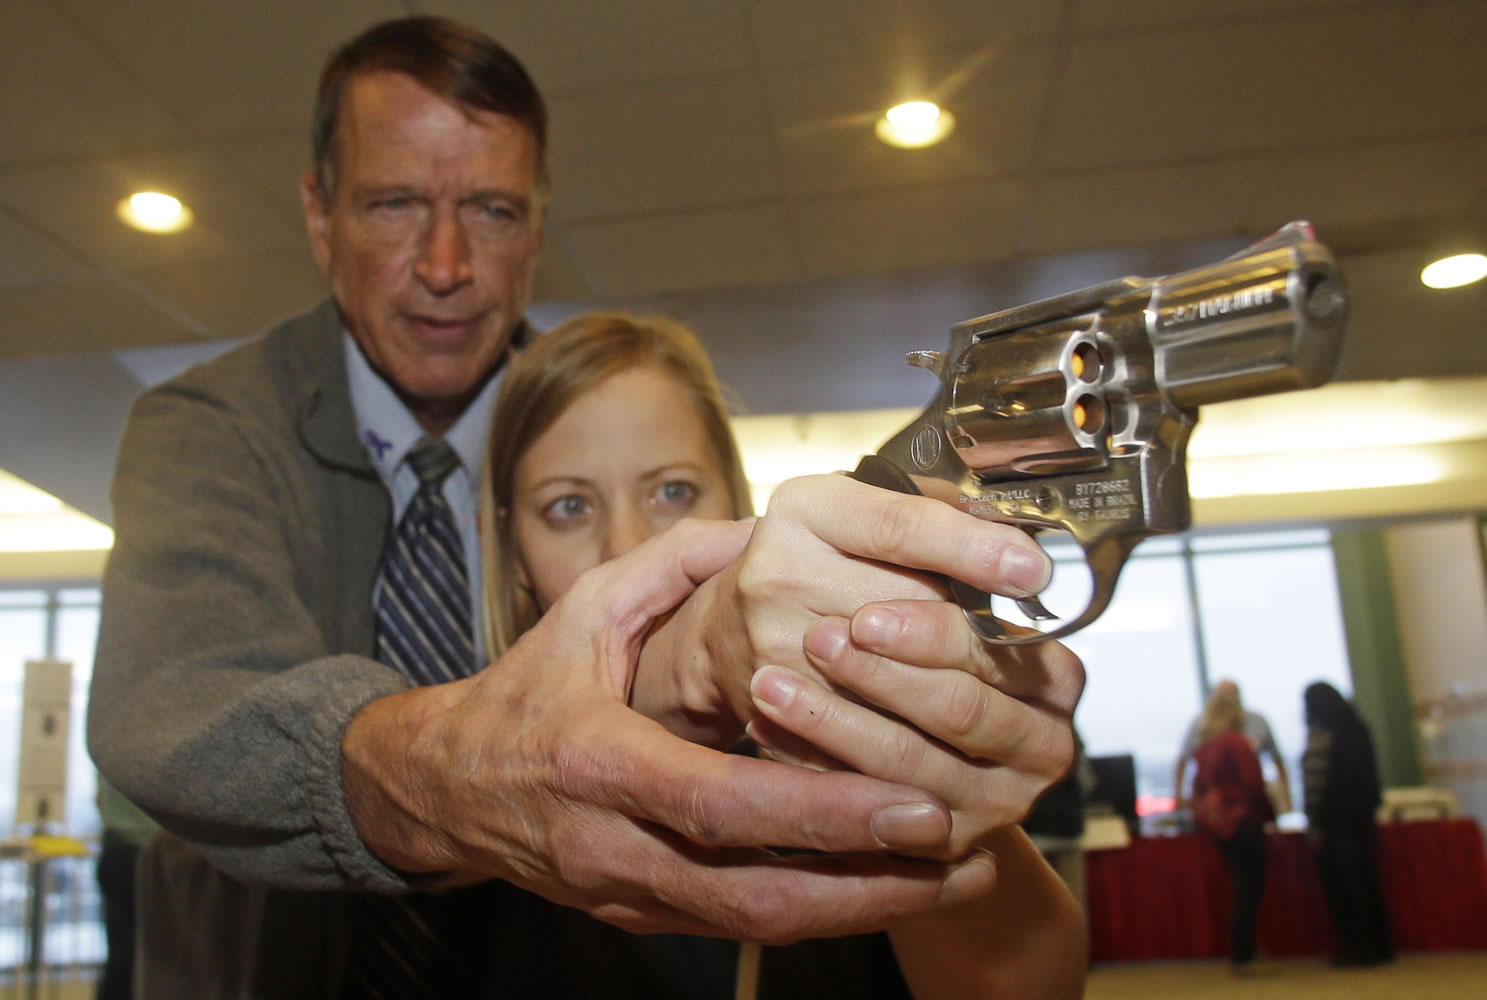 Cori Sorensen, a fourth-grade teacher from Highland Elementary School in Highland, Utah, receives firearms training in December with a .357 magnum from personal defense instructor Jim McCarthy in West Valley City, Utah, where teachers and administrators are allowed to bring guns to school.